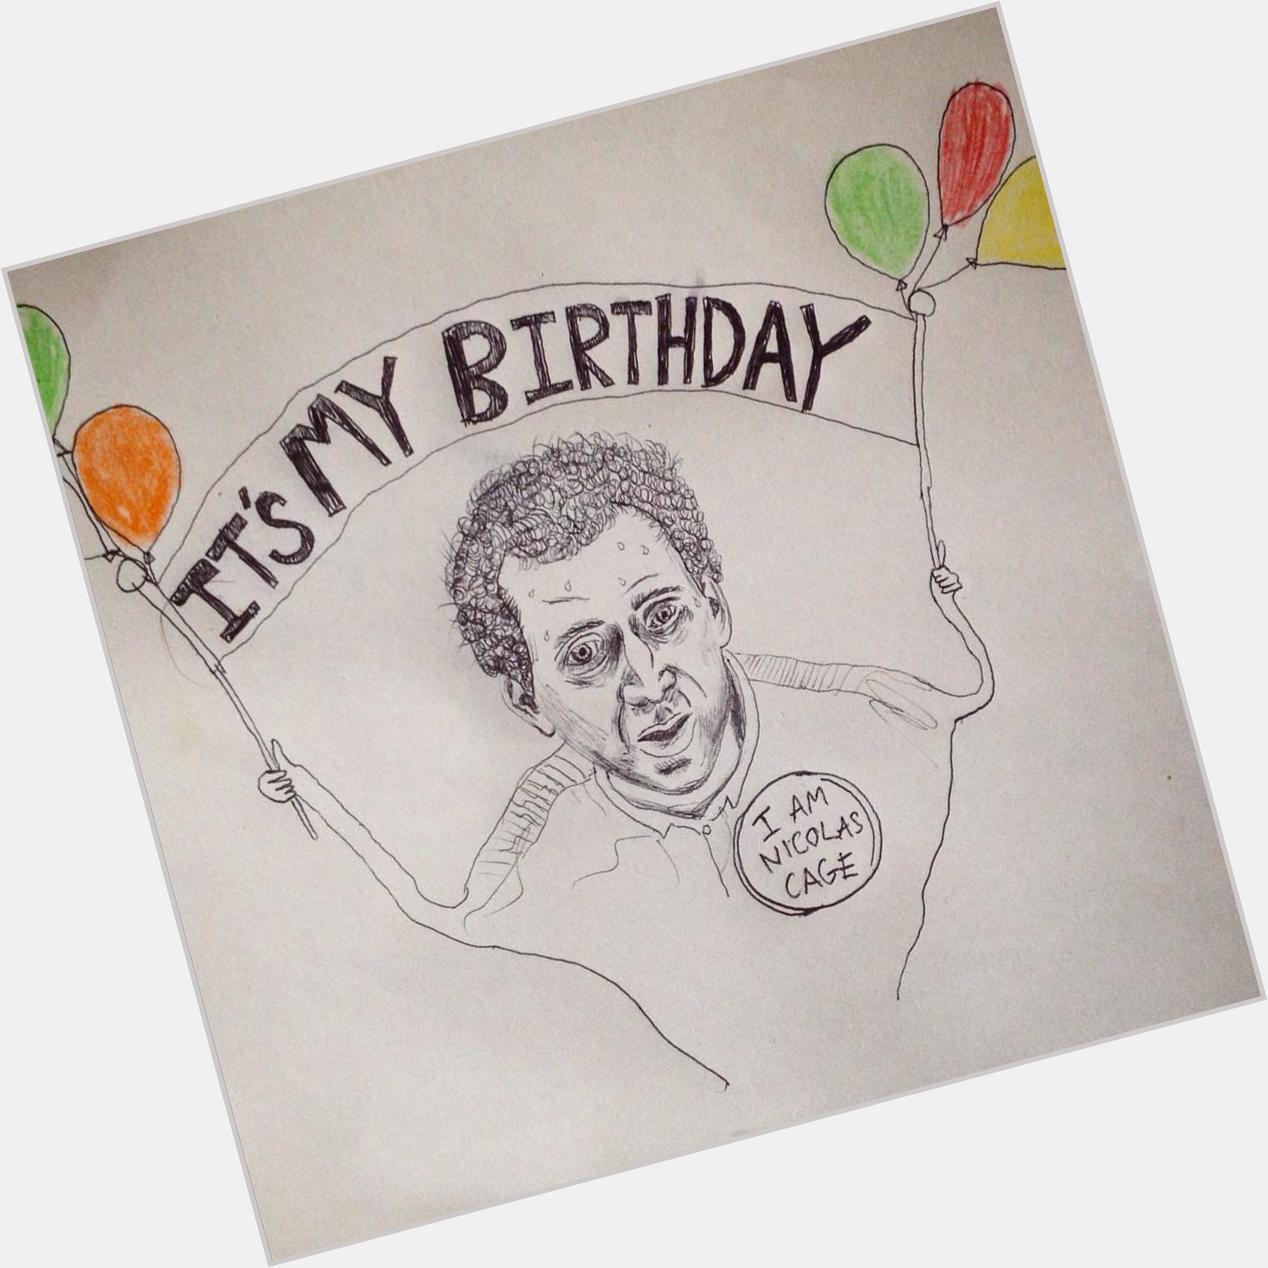 Happy Birthday Nicolas Cage! Why not draw Nicolas Cage with a biro for his Birthday & wang it up here. 